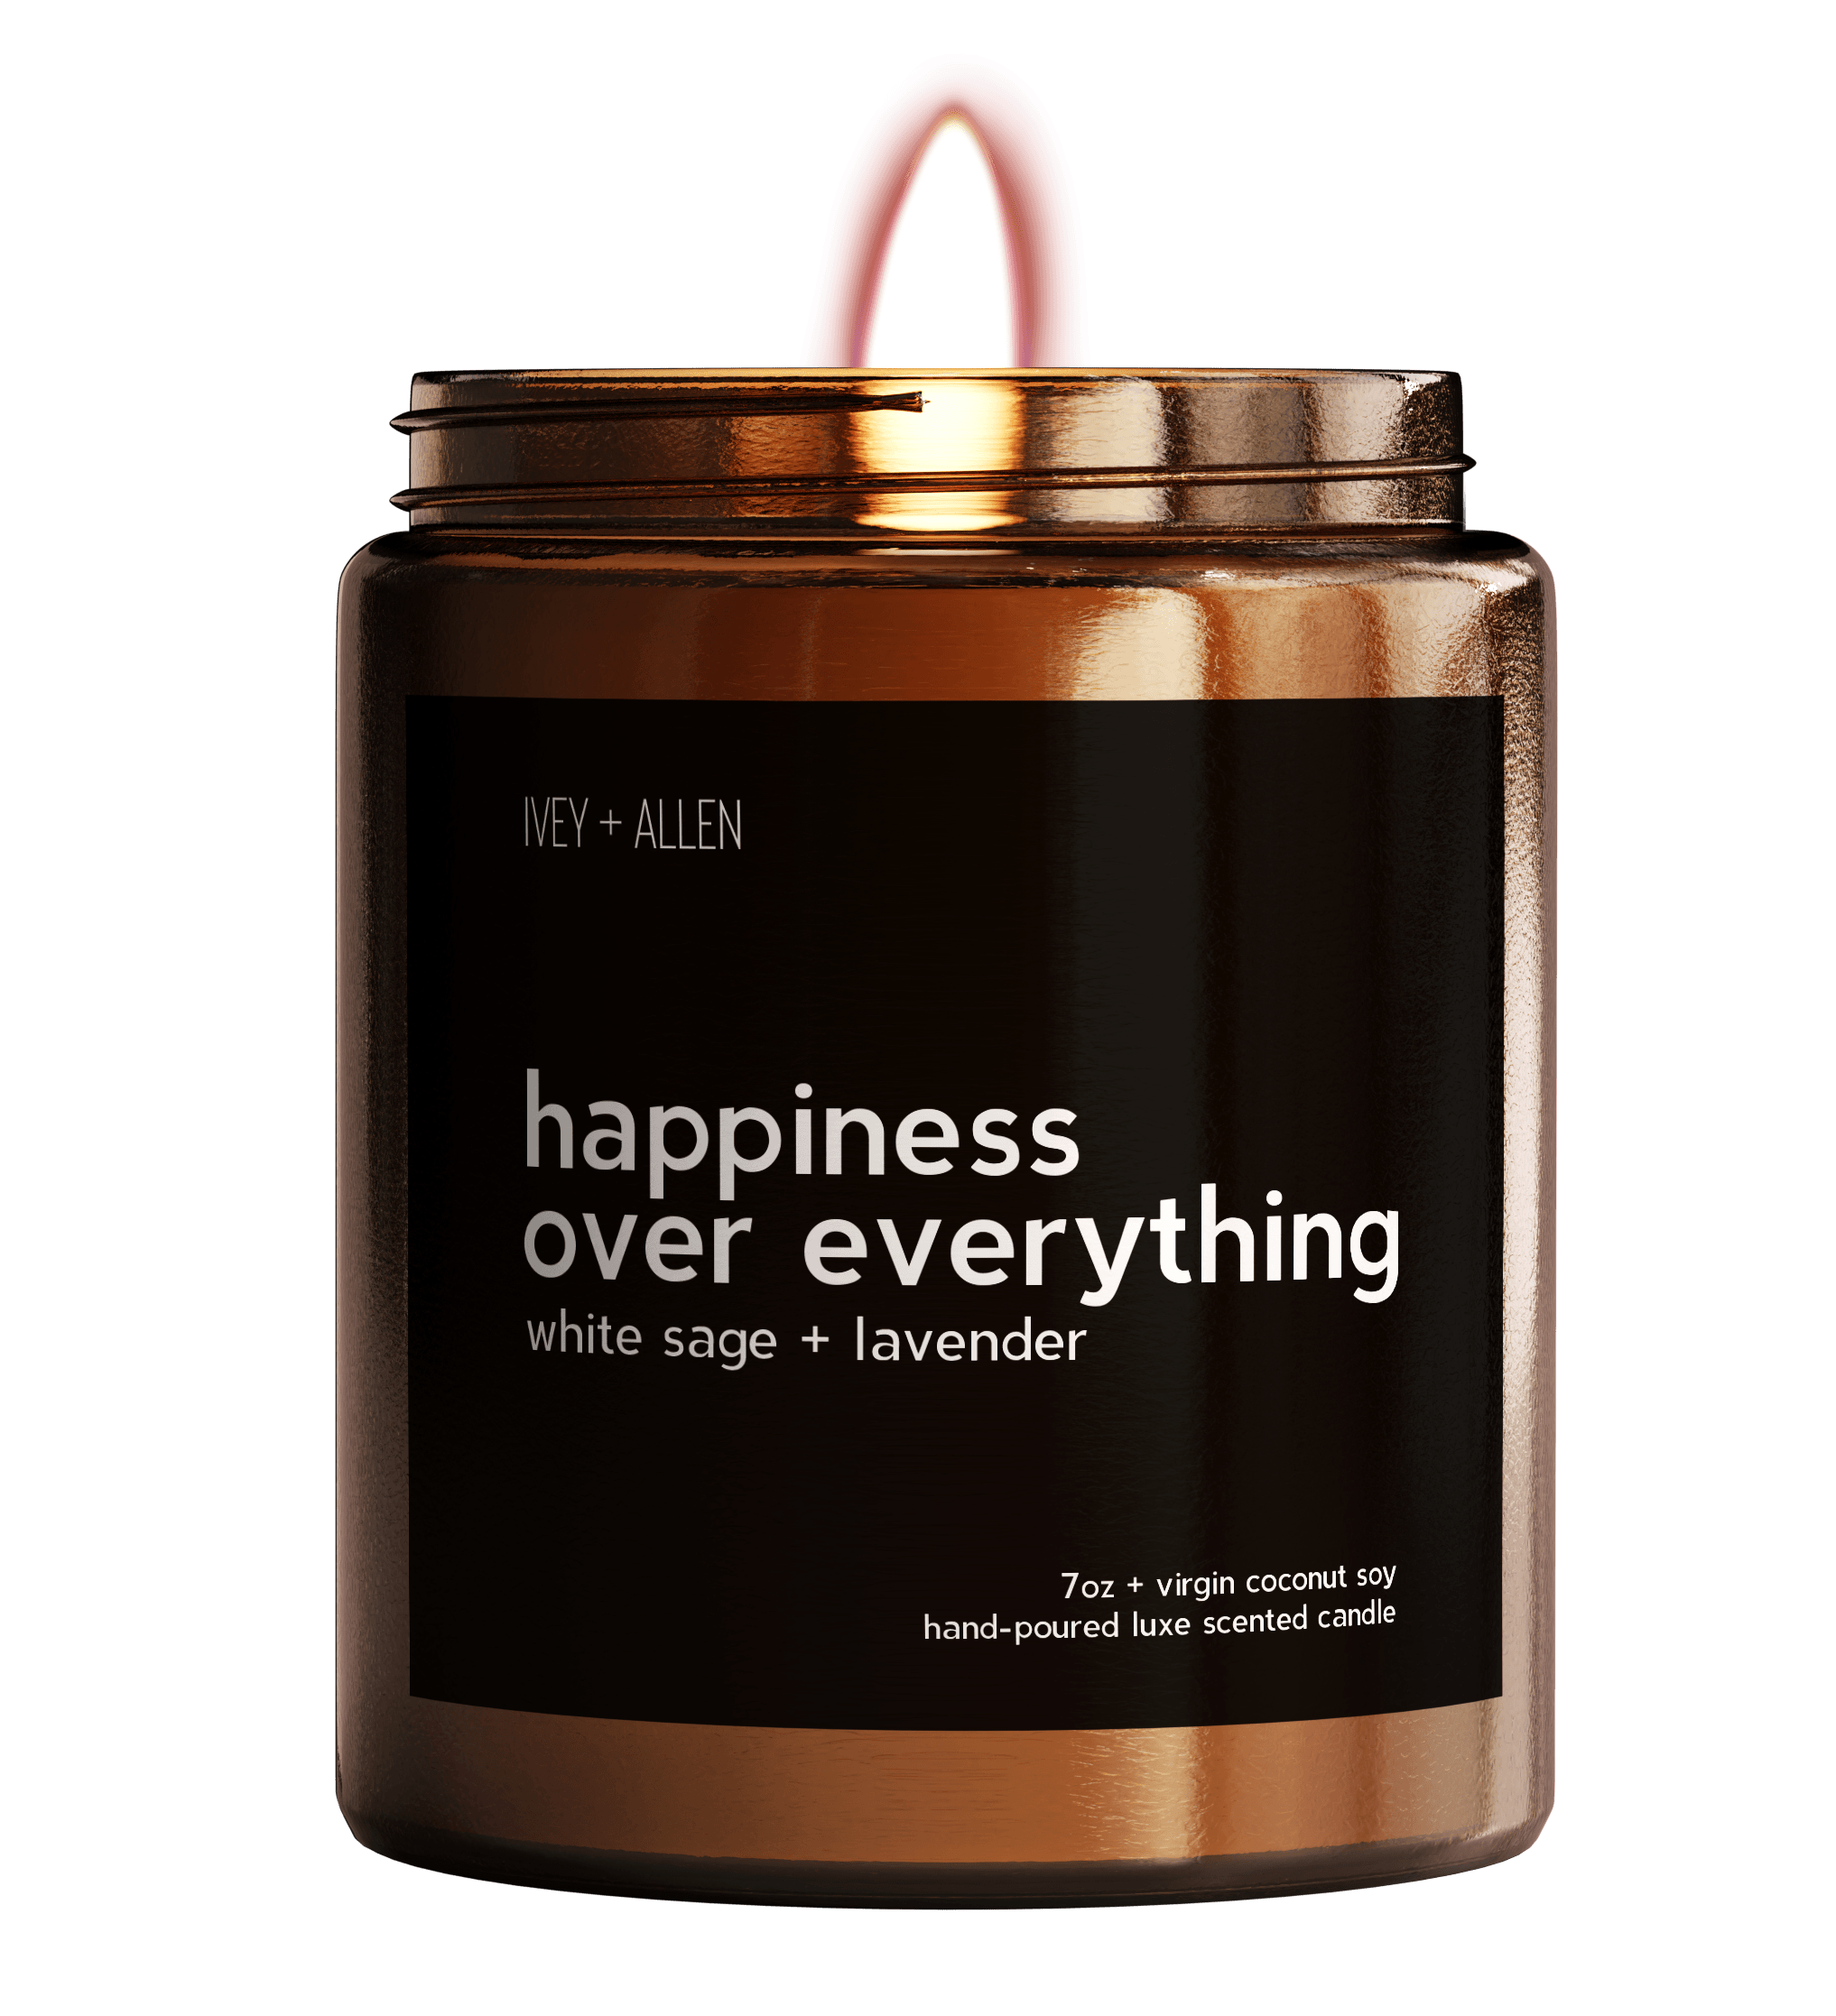 happiness over everything - IVEY + ALLEN